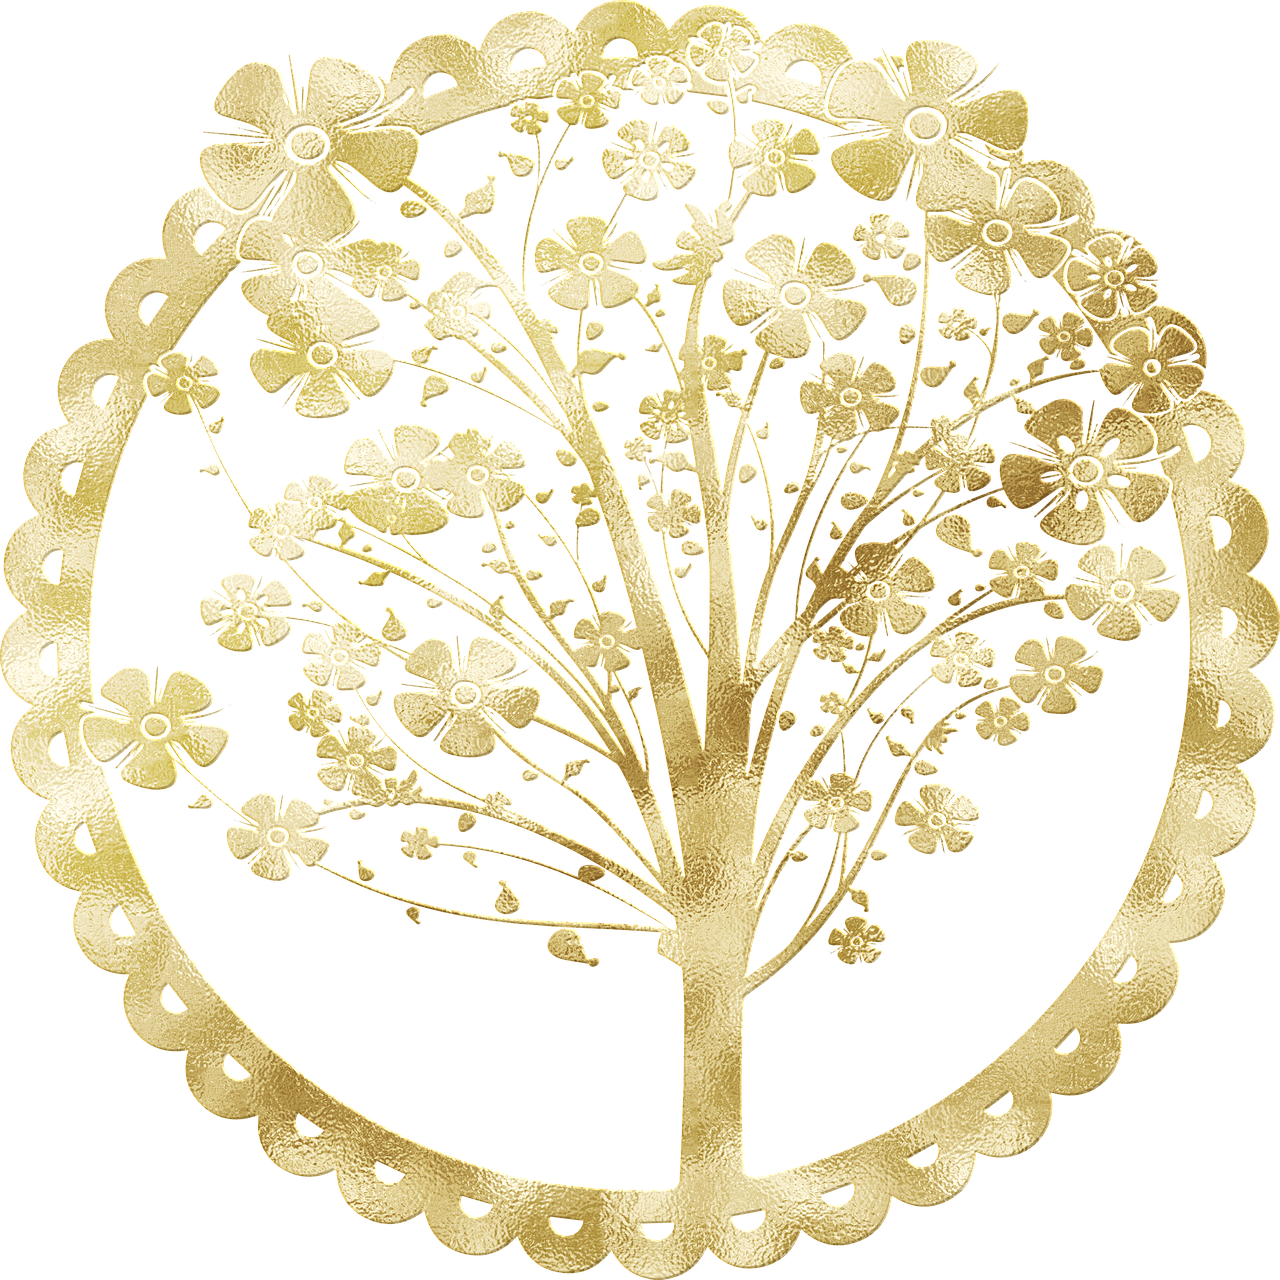 a gold tree in a circle on a black background, a digital rendering, art nouveau, trees and flowers, ornamental bone carvings, cloisonne, detailed lacework